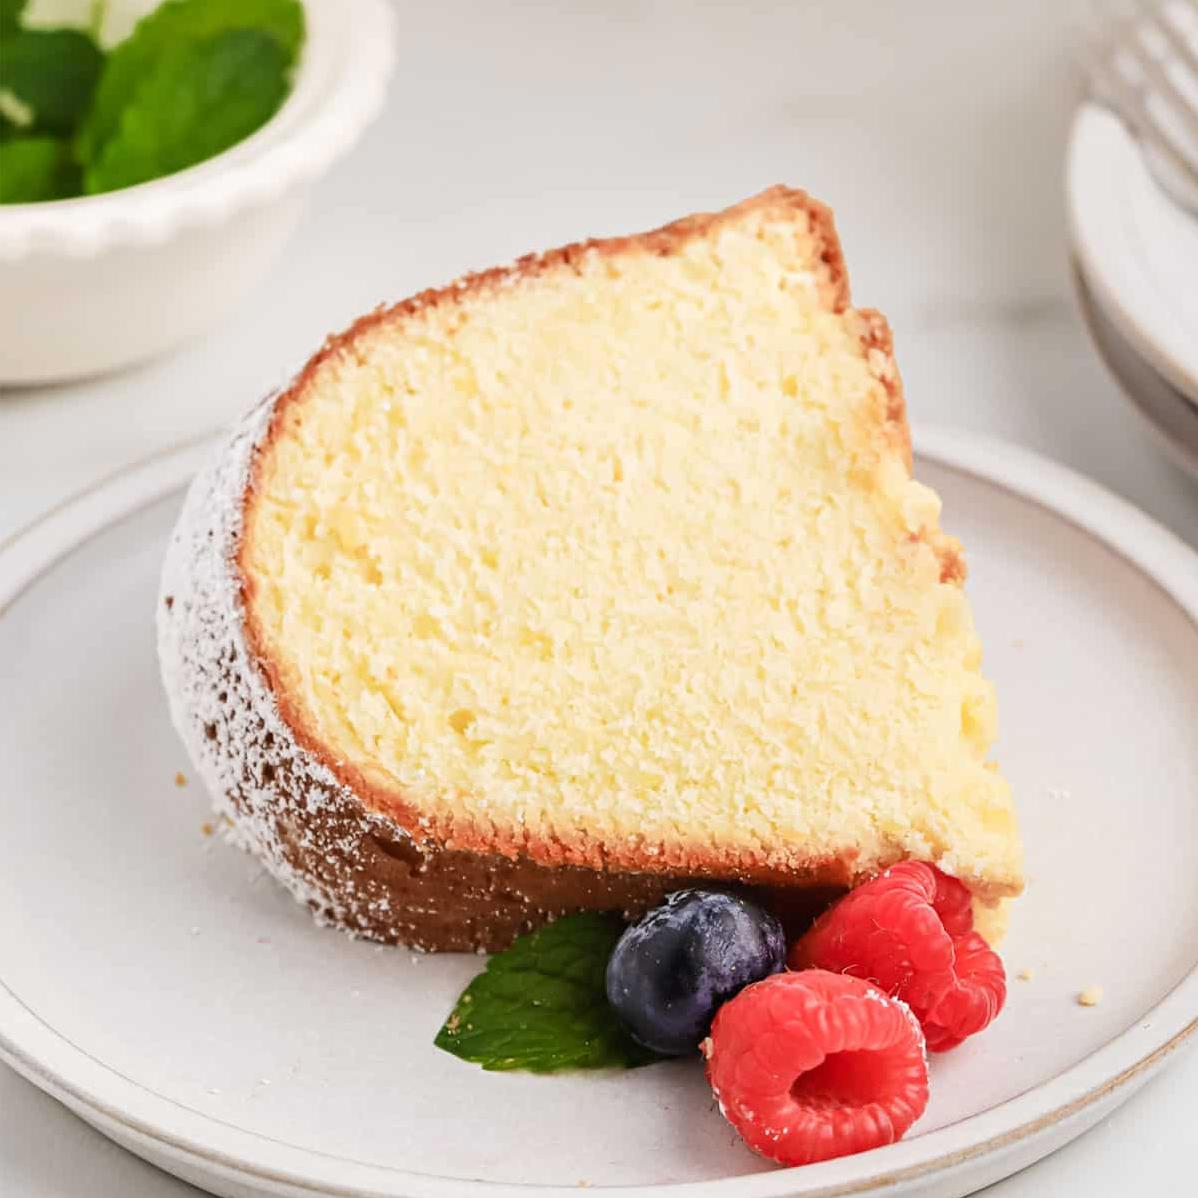  Thick, buttery slices of pound cake, ready to devour